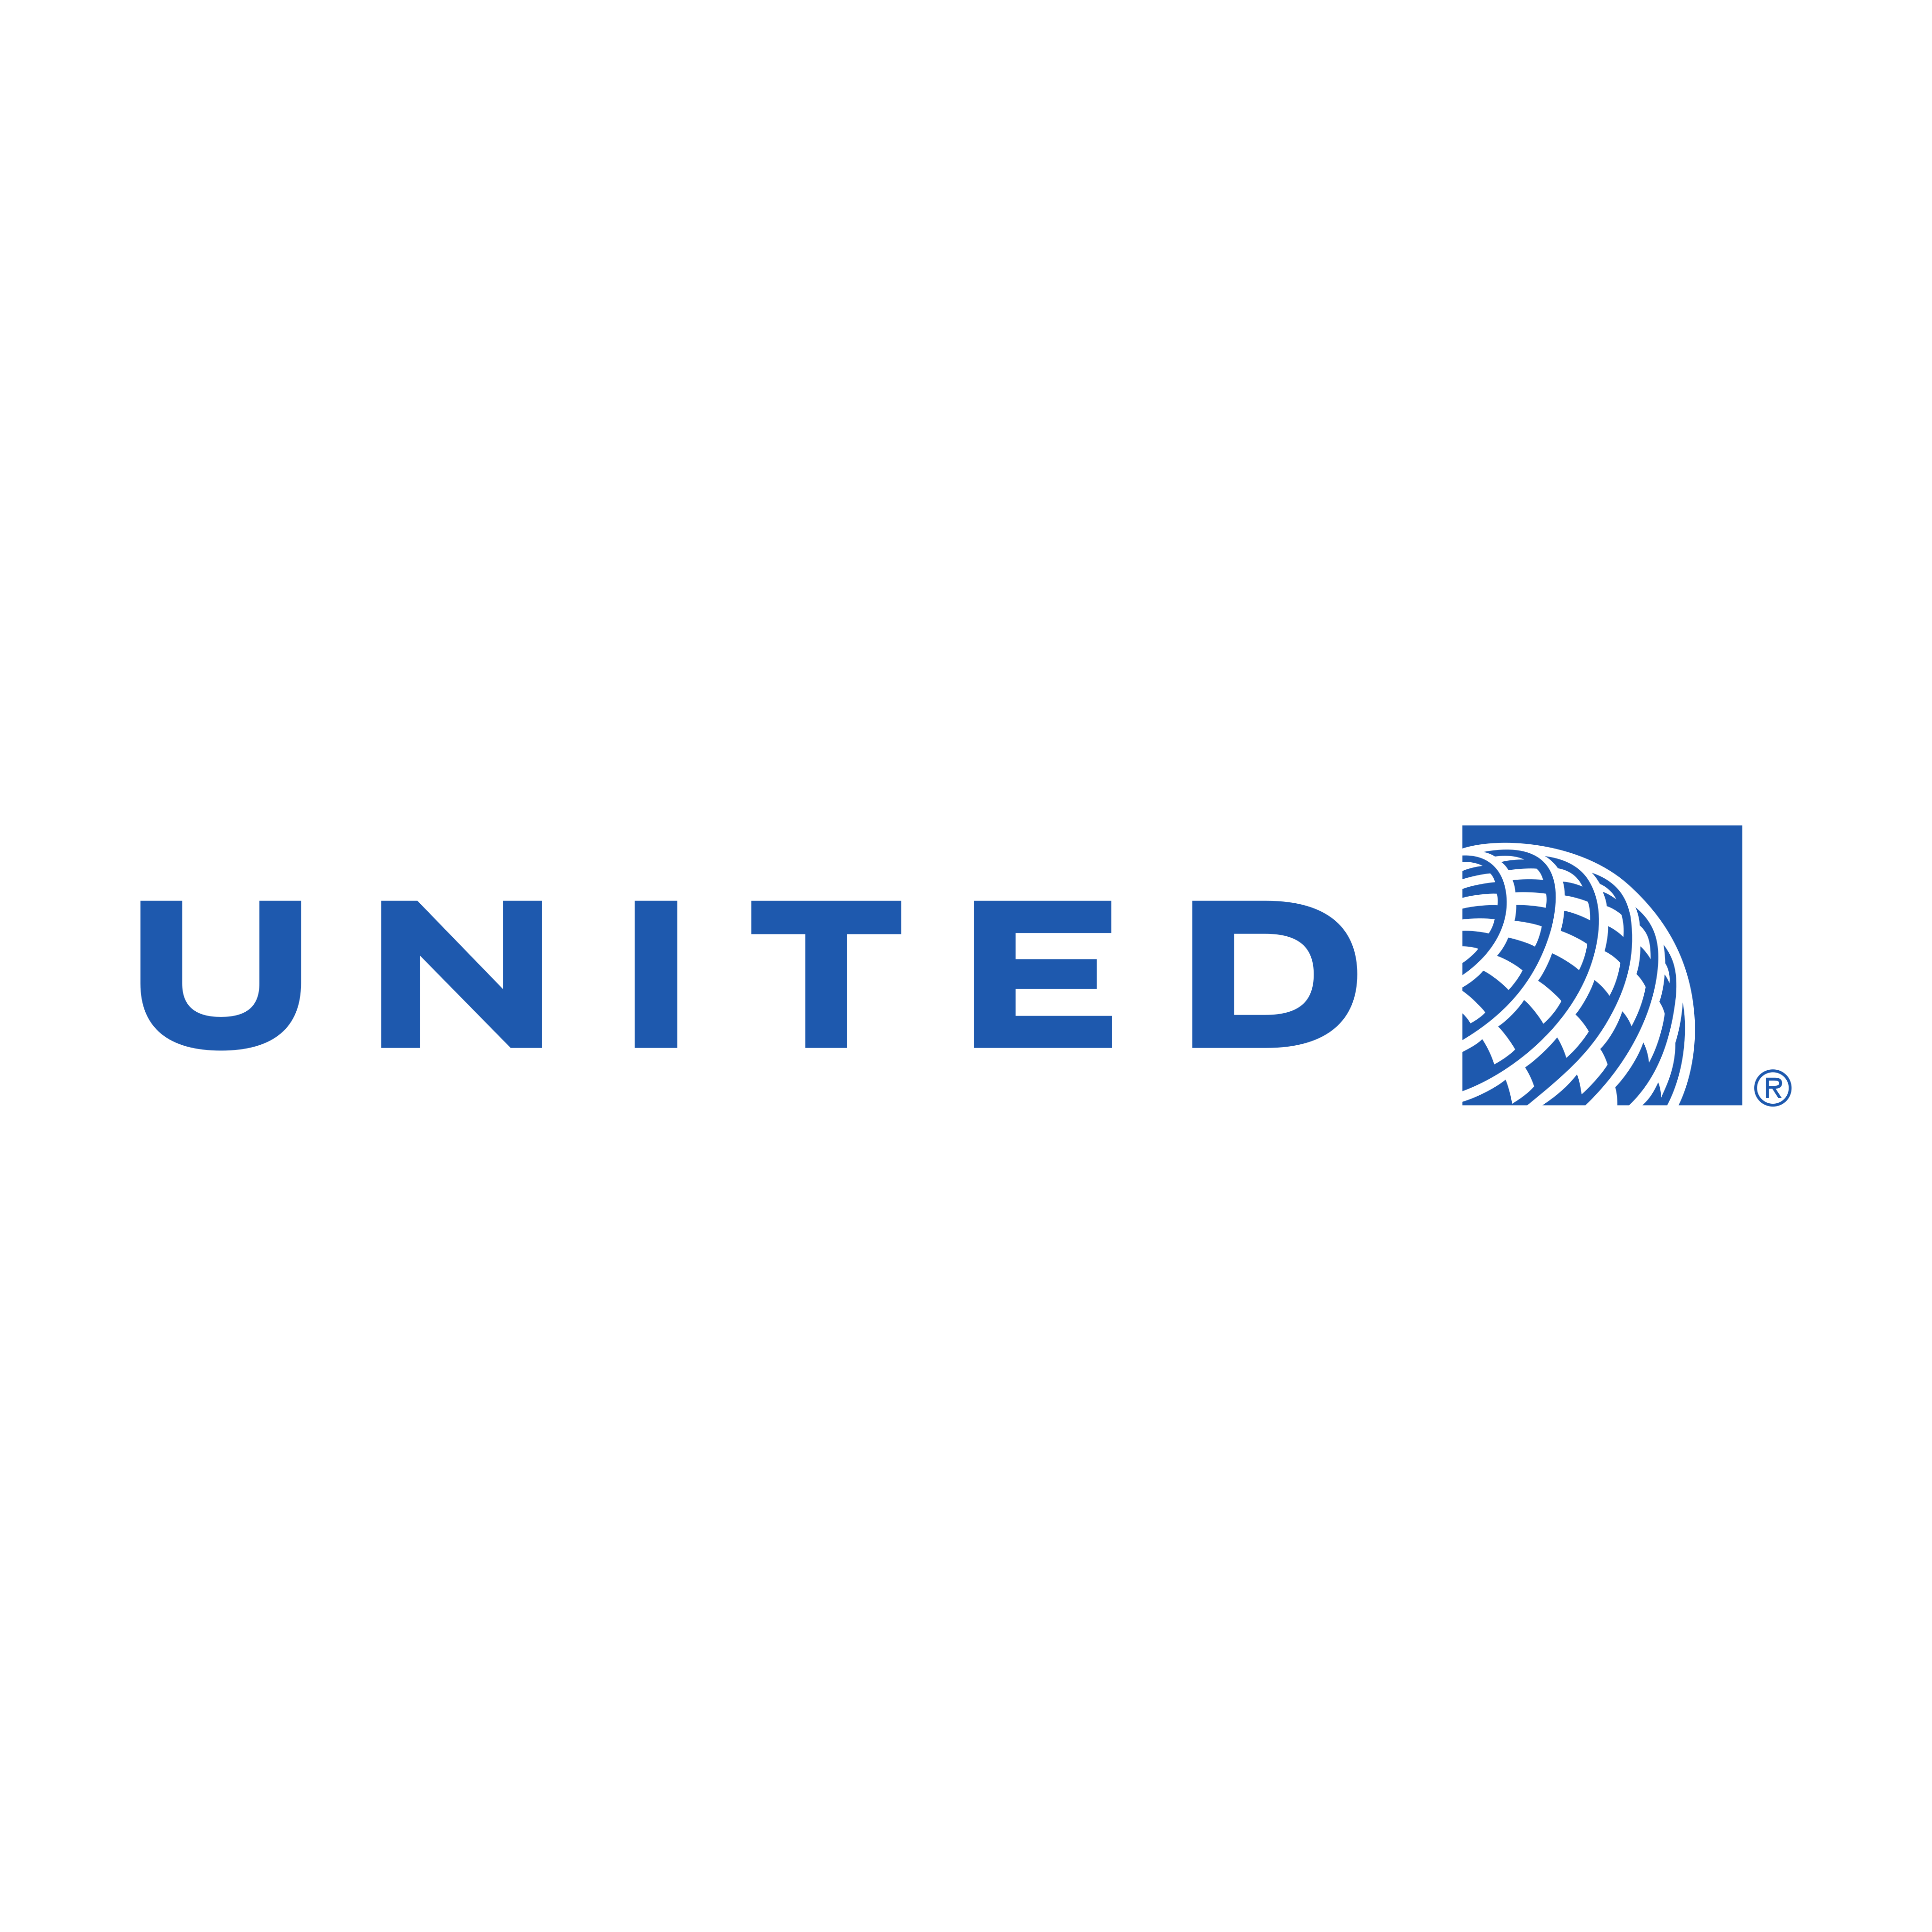 United Airlines Logo PNG.